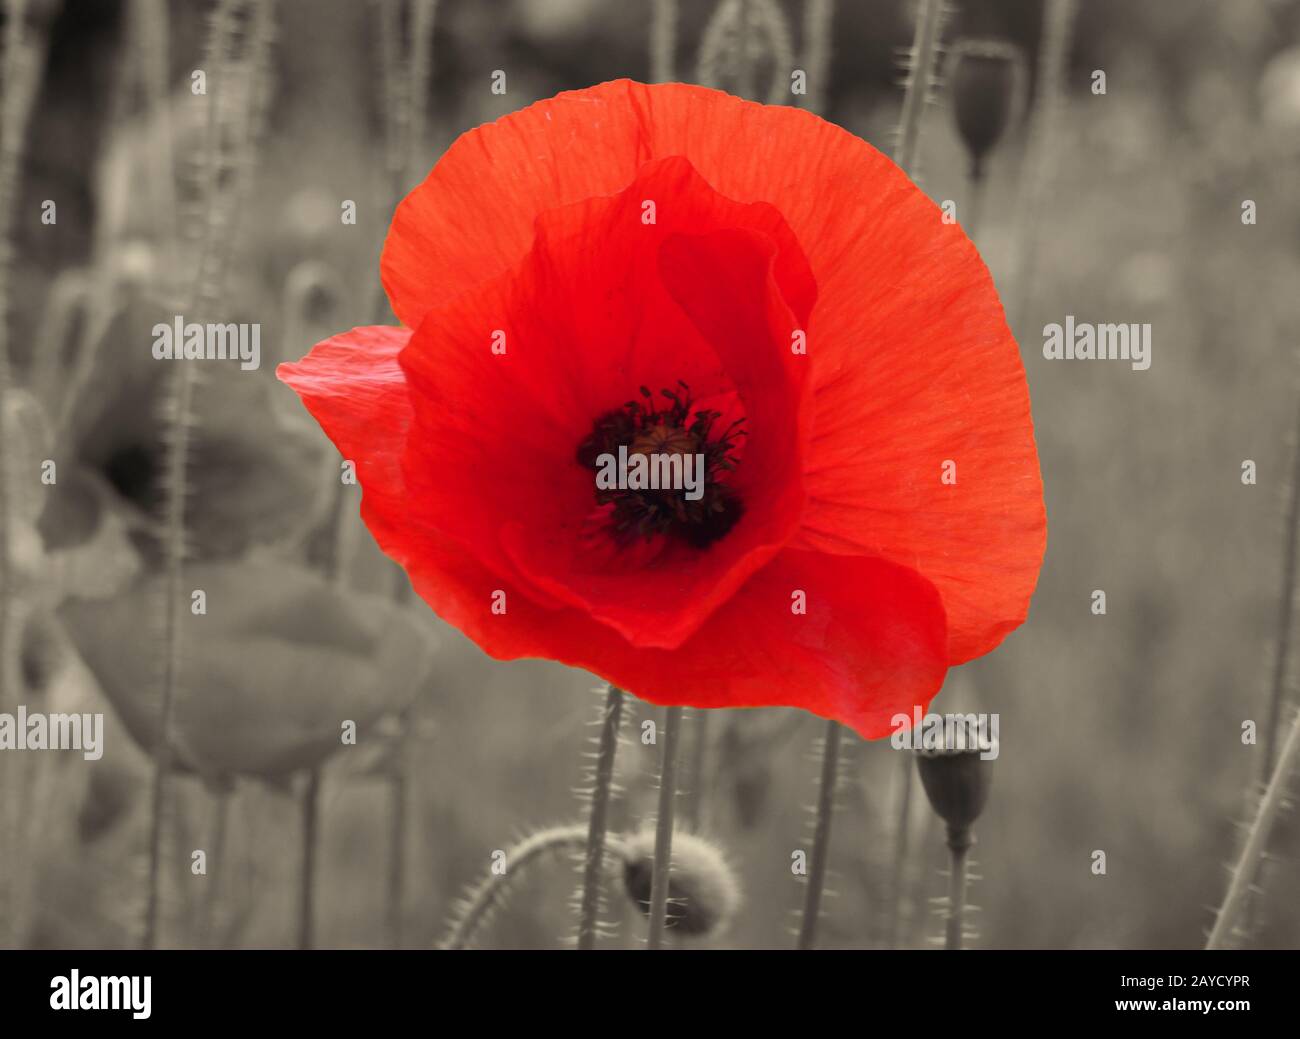 a close up of a bright red common poppy flower on a vintage sepia background - war remembrance concept Stock Photo